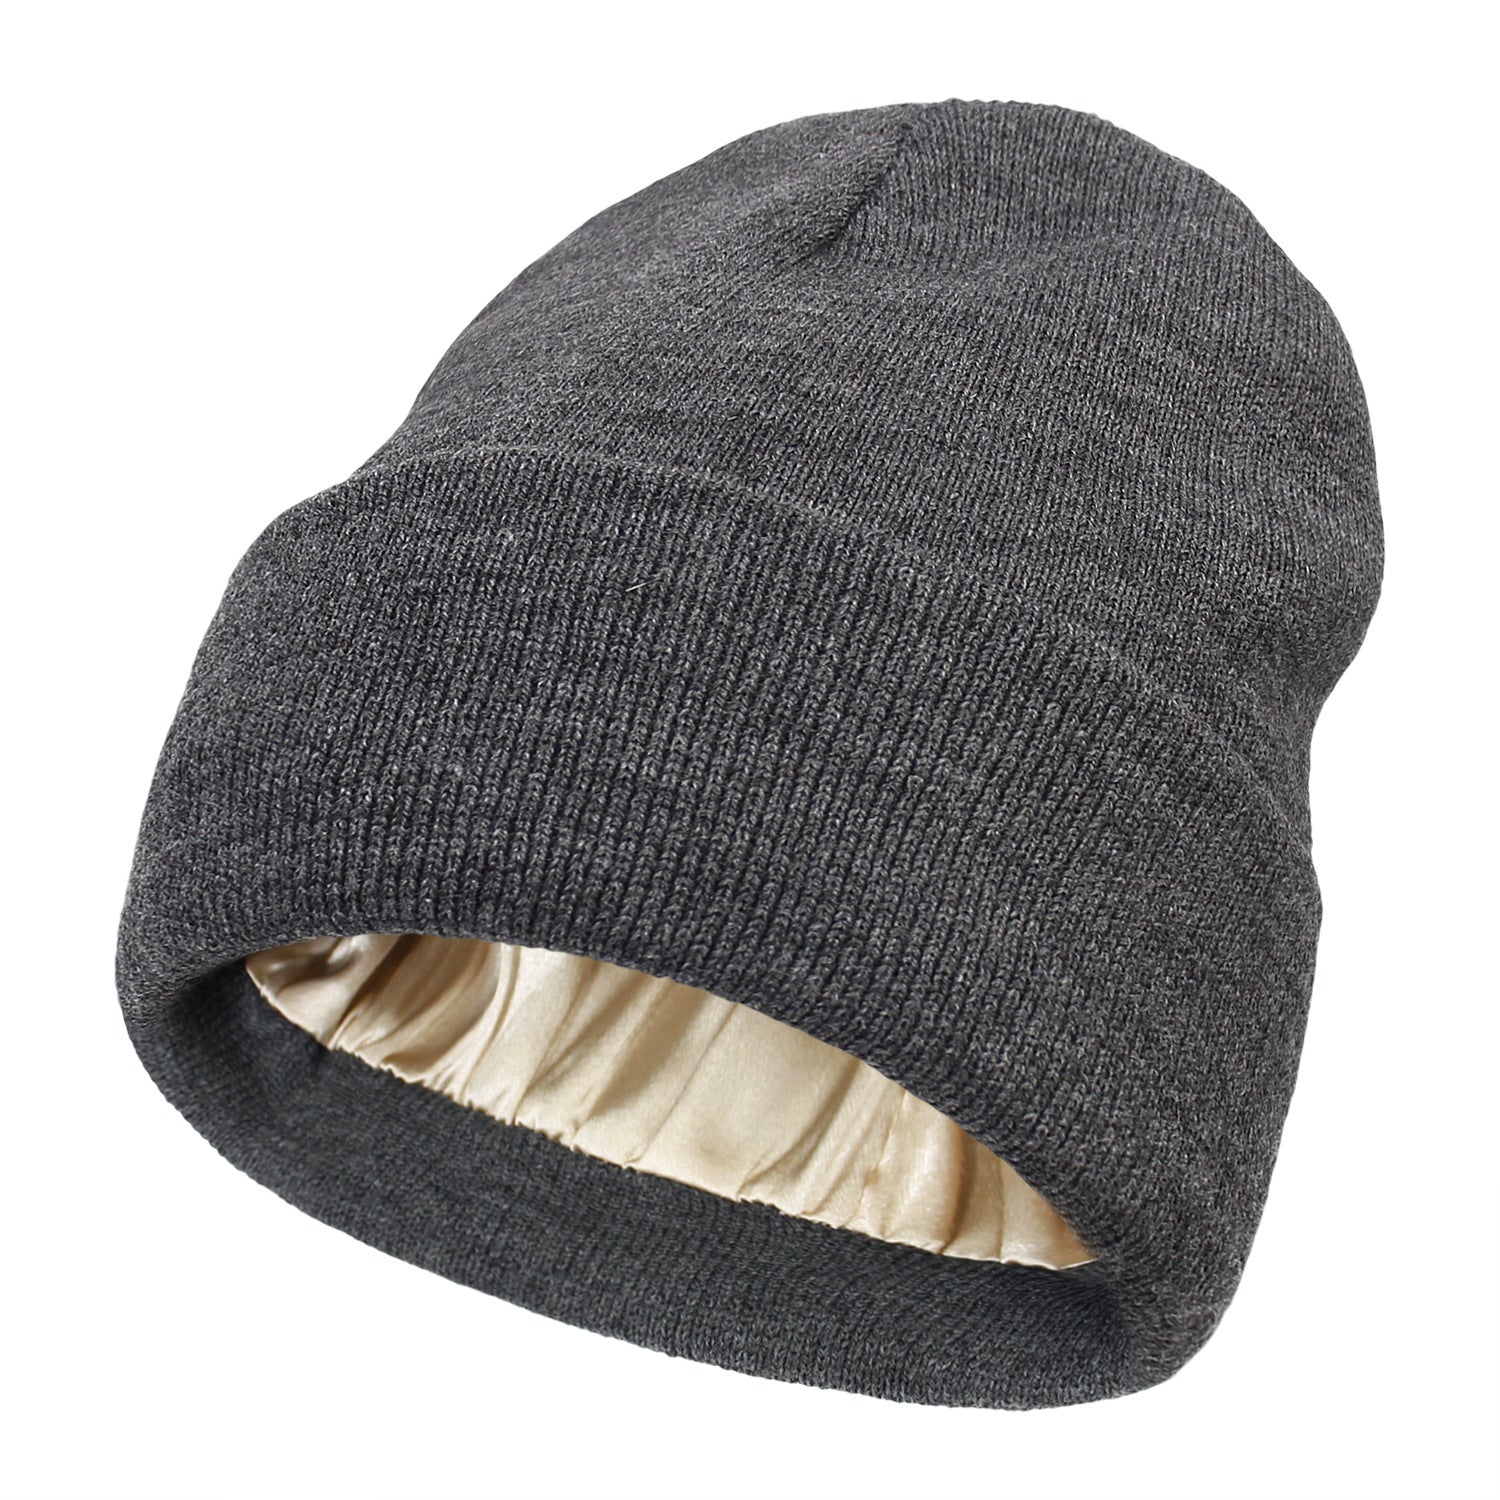 Importikaah-Stylish-Satin-Beanie-designed-comfort-hair-care-high-quality-smooth